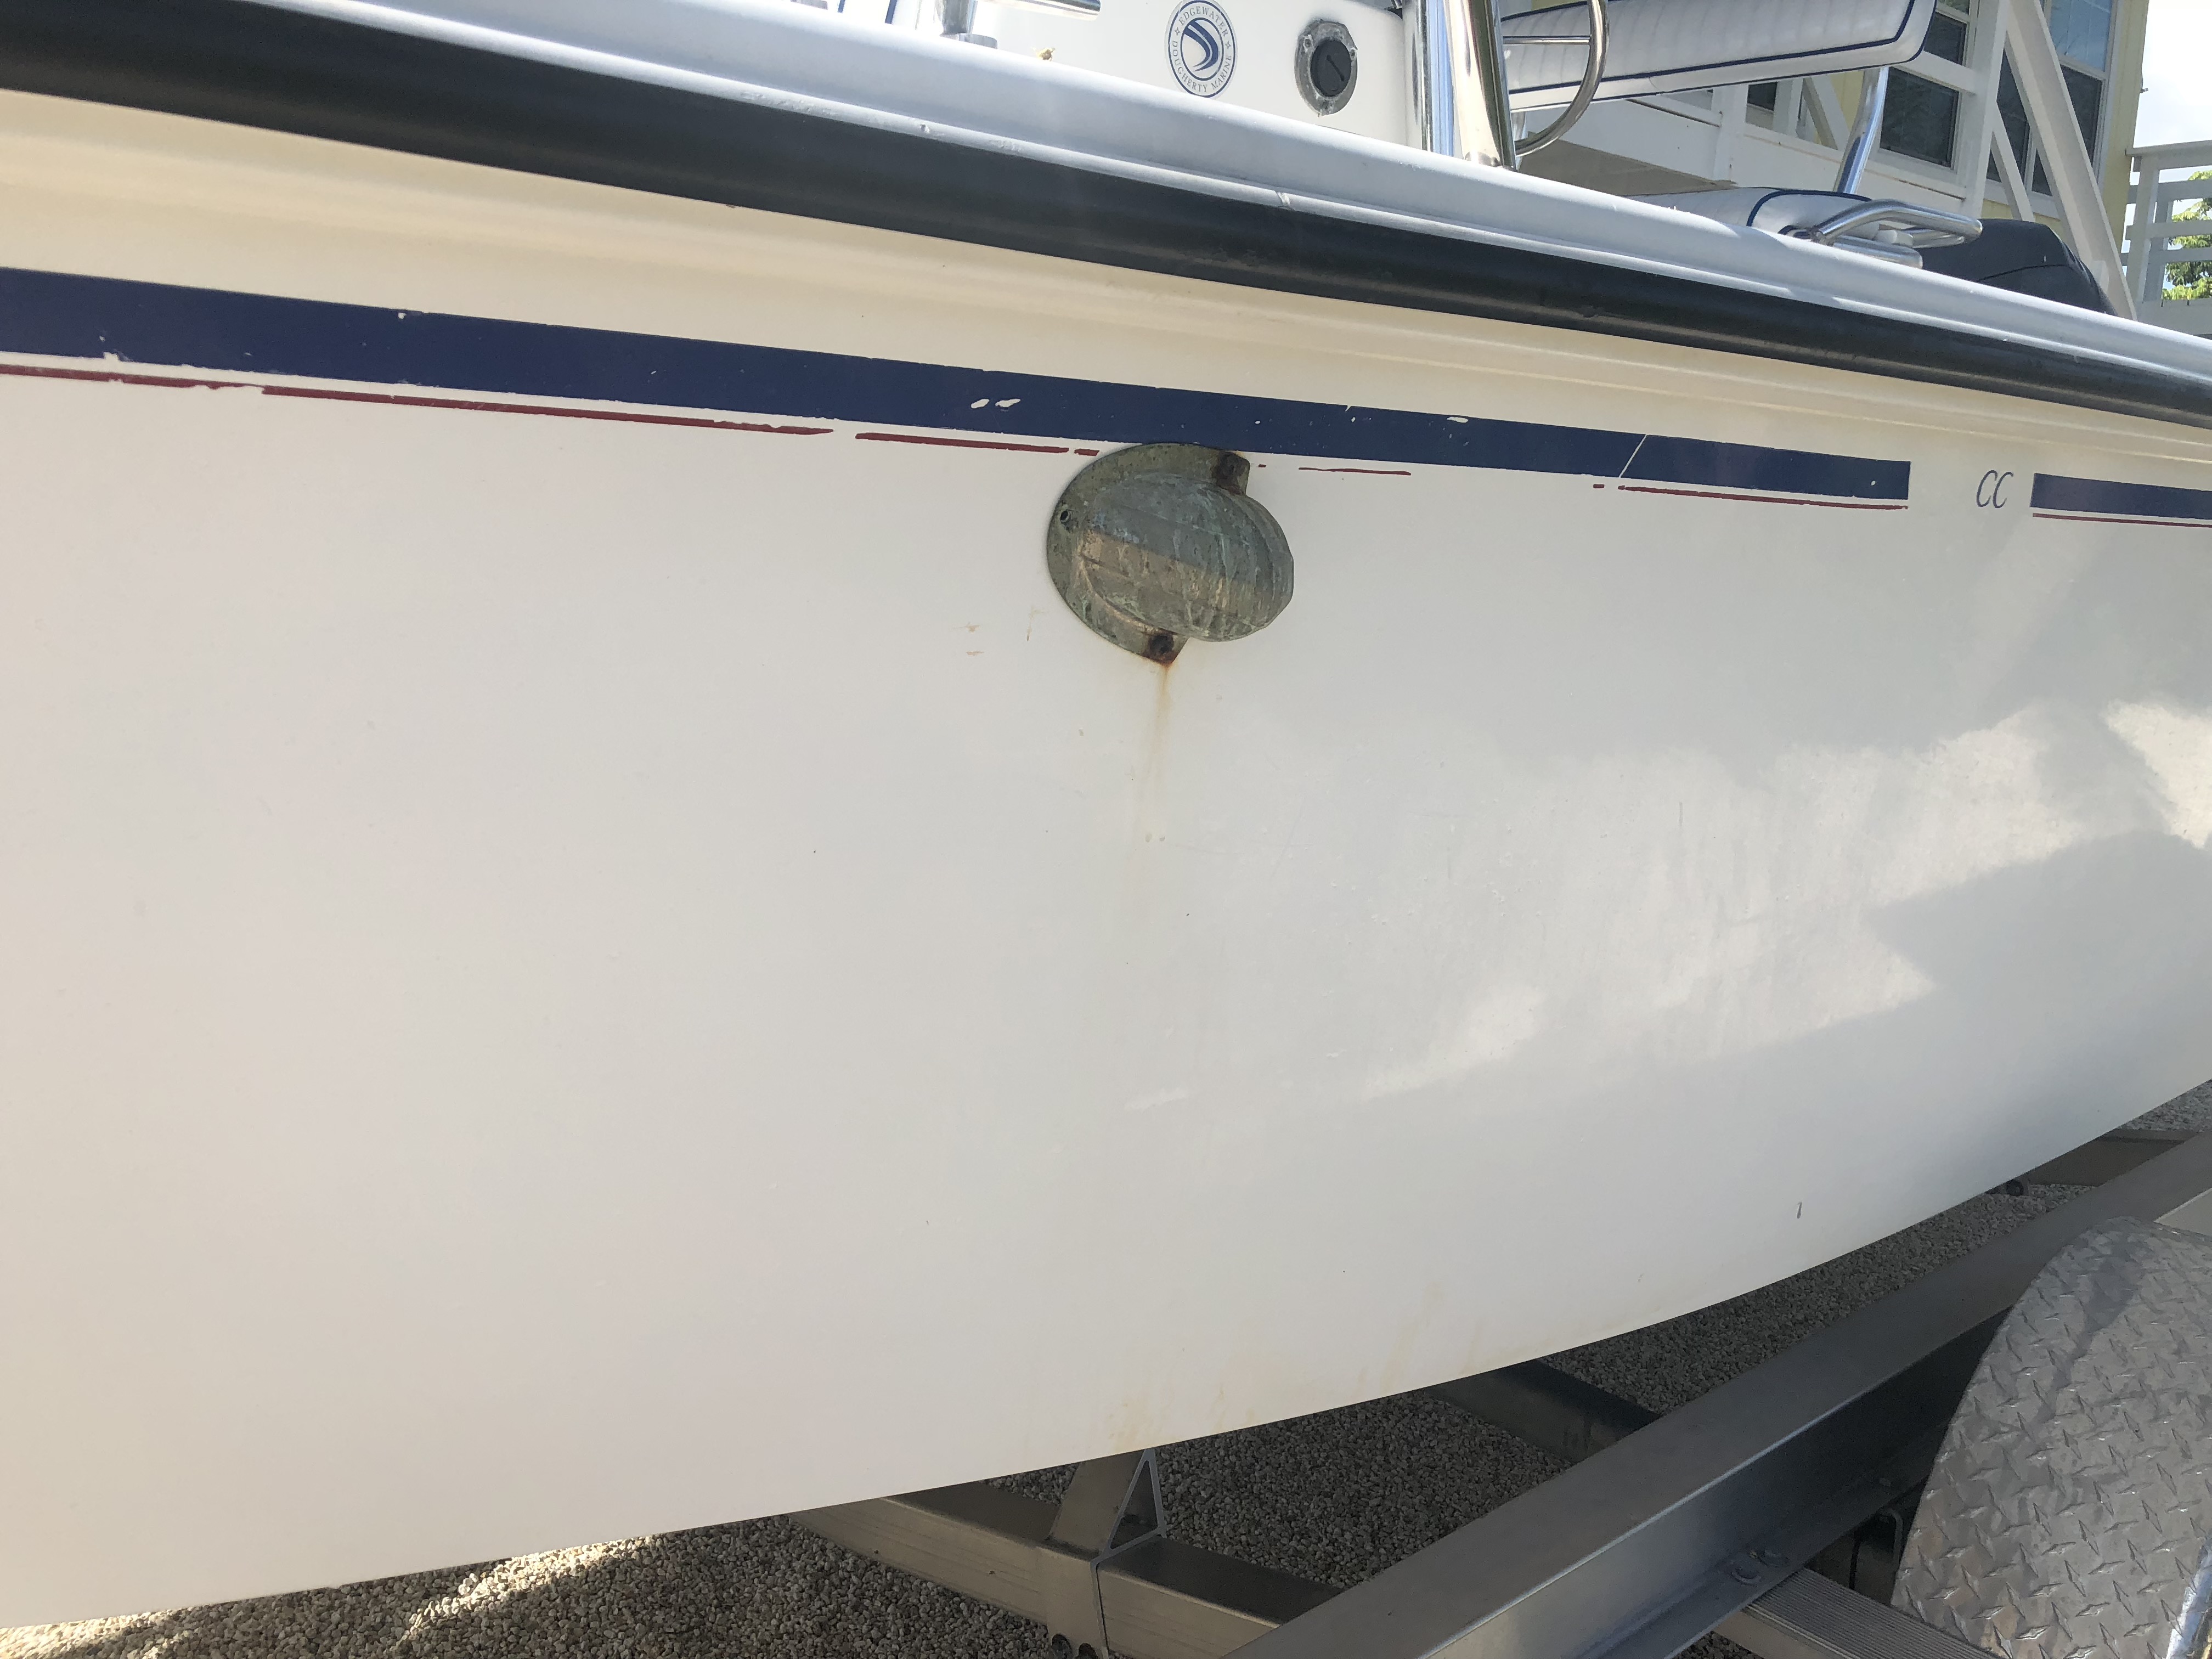 Stains on the hull of Edgewater boat before detailing